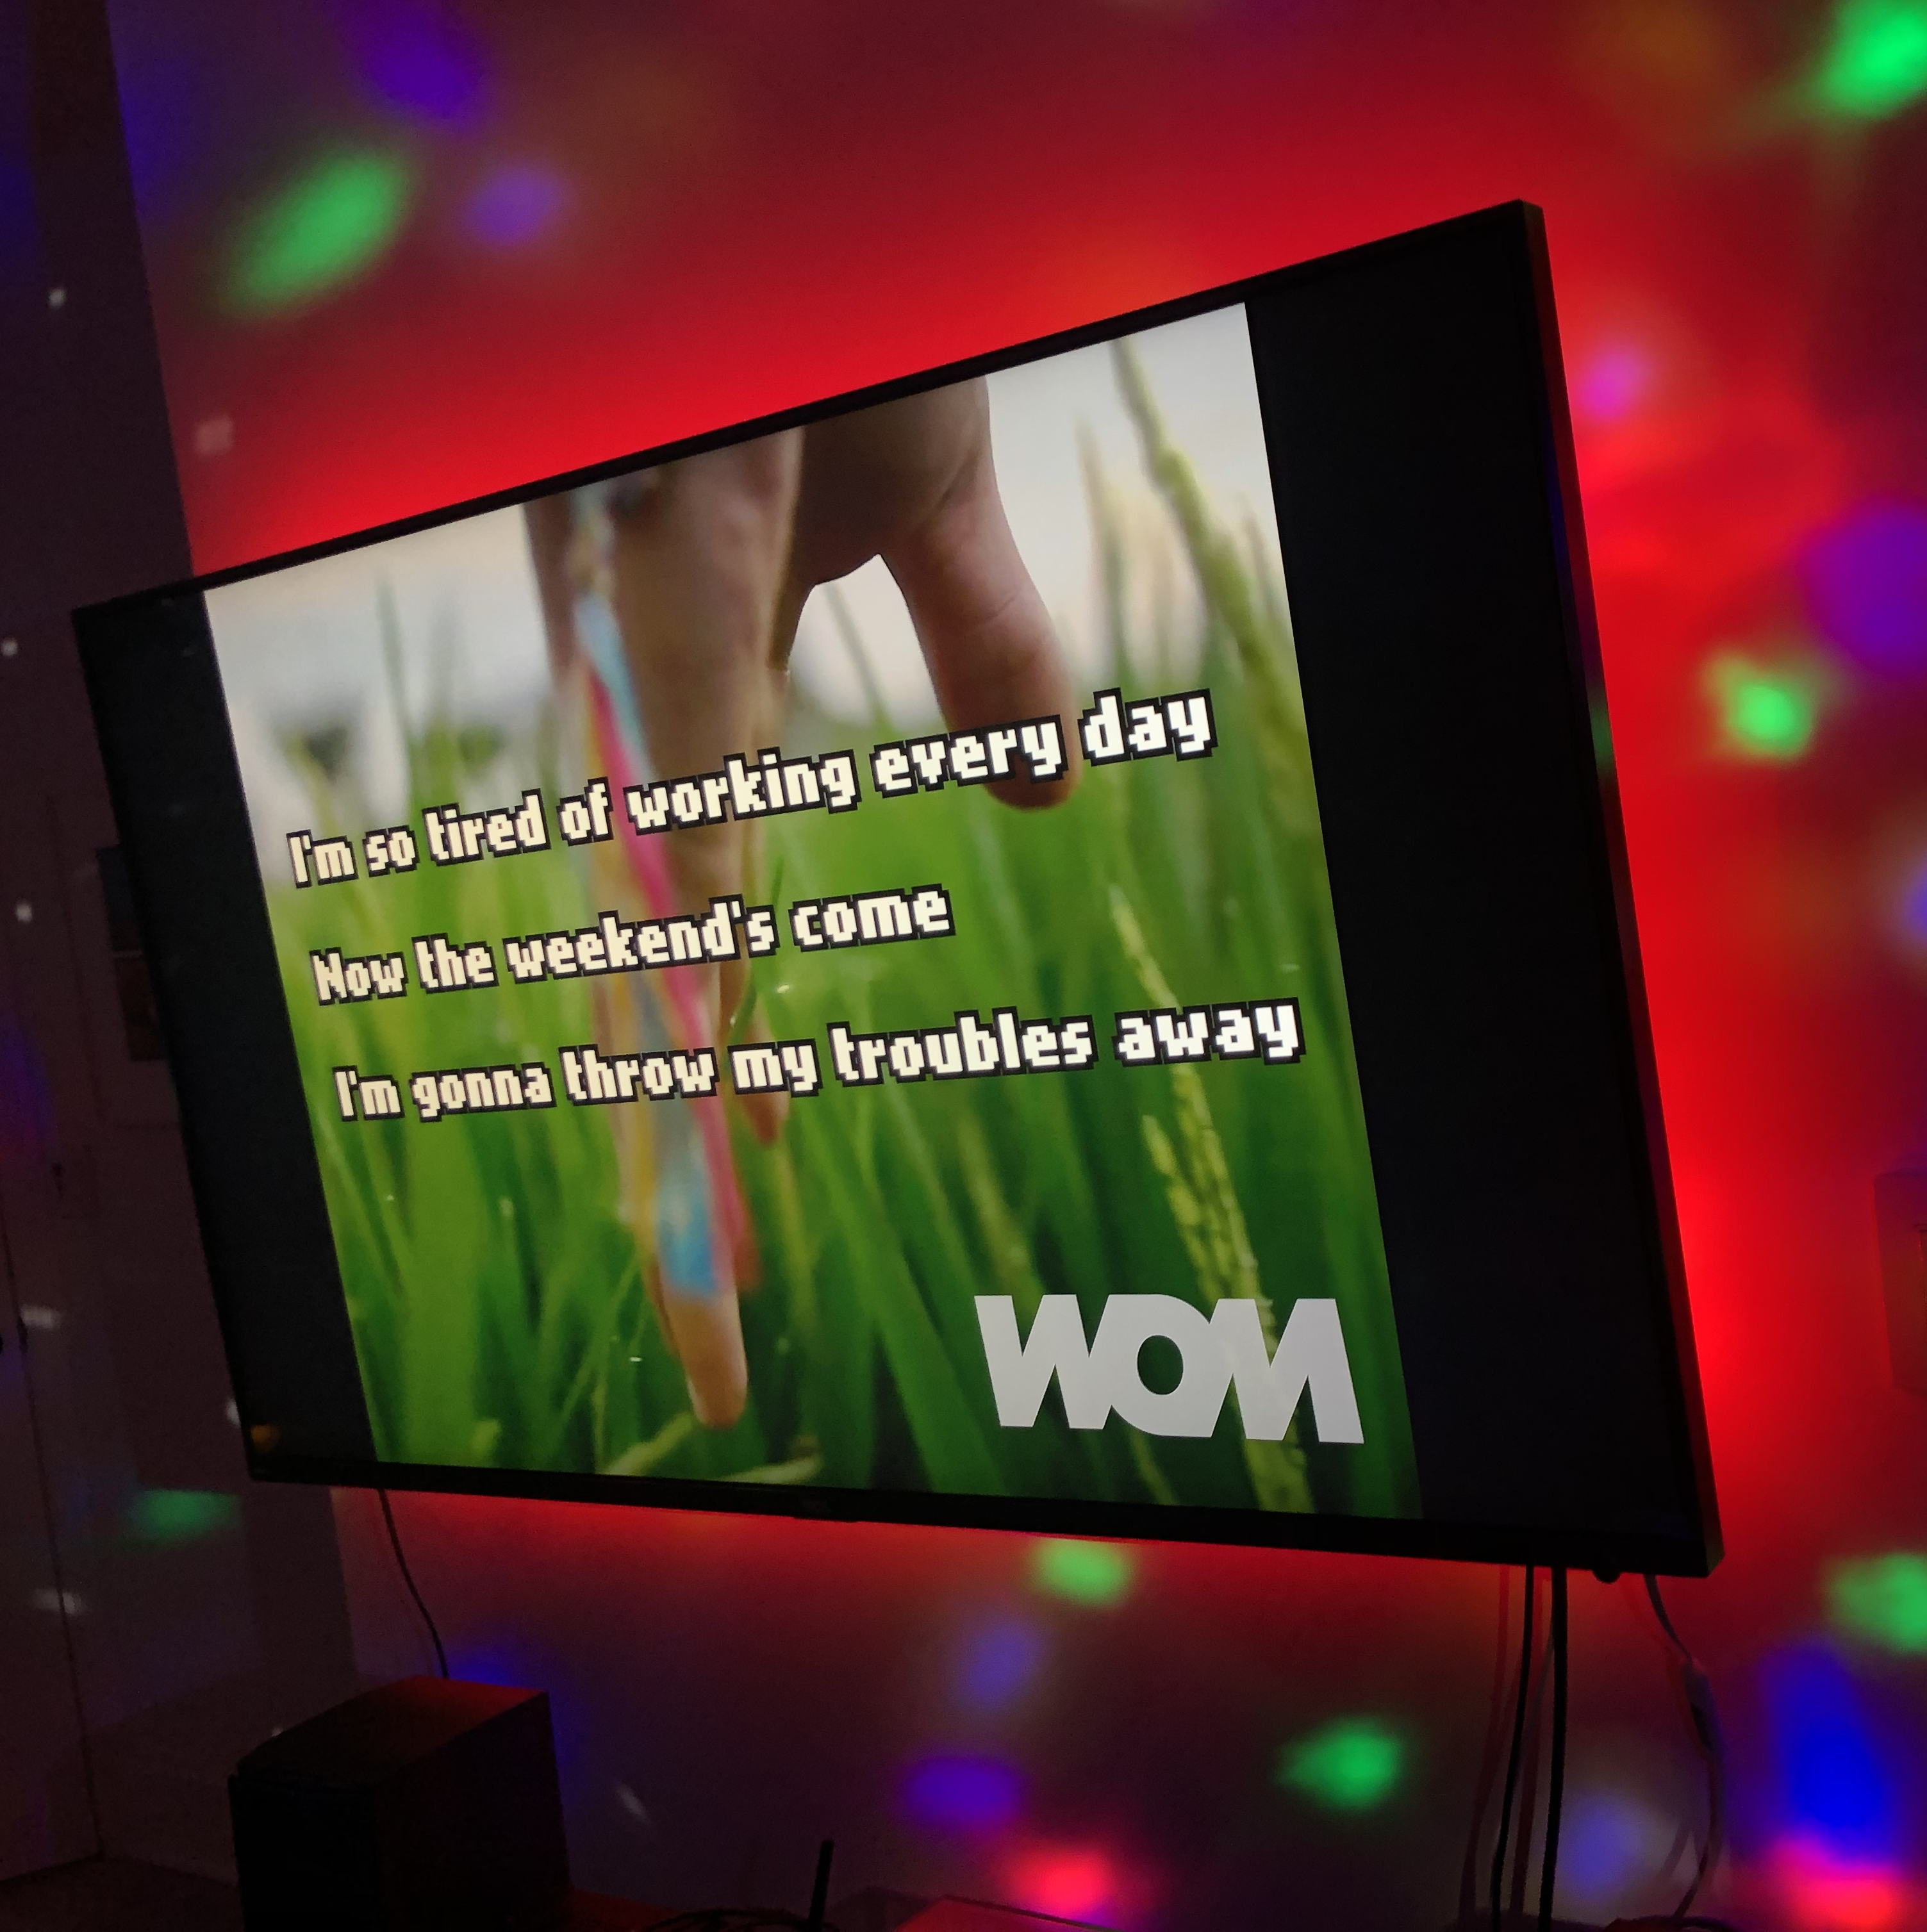 A TV screen with song lyrics, in a room with multicolored lighting.